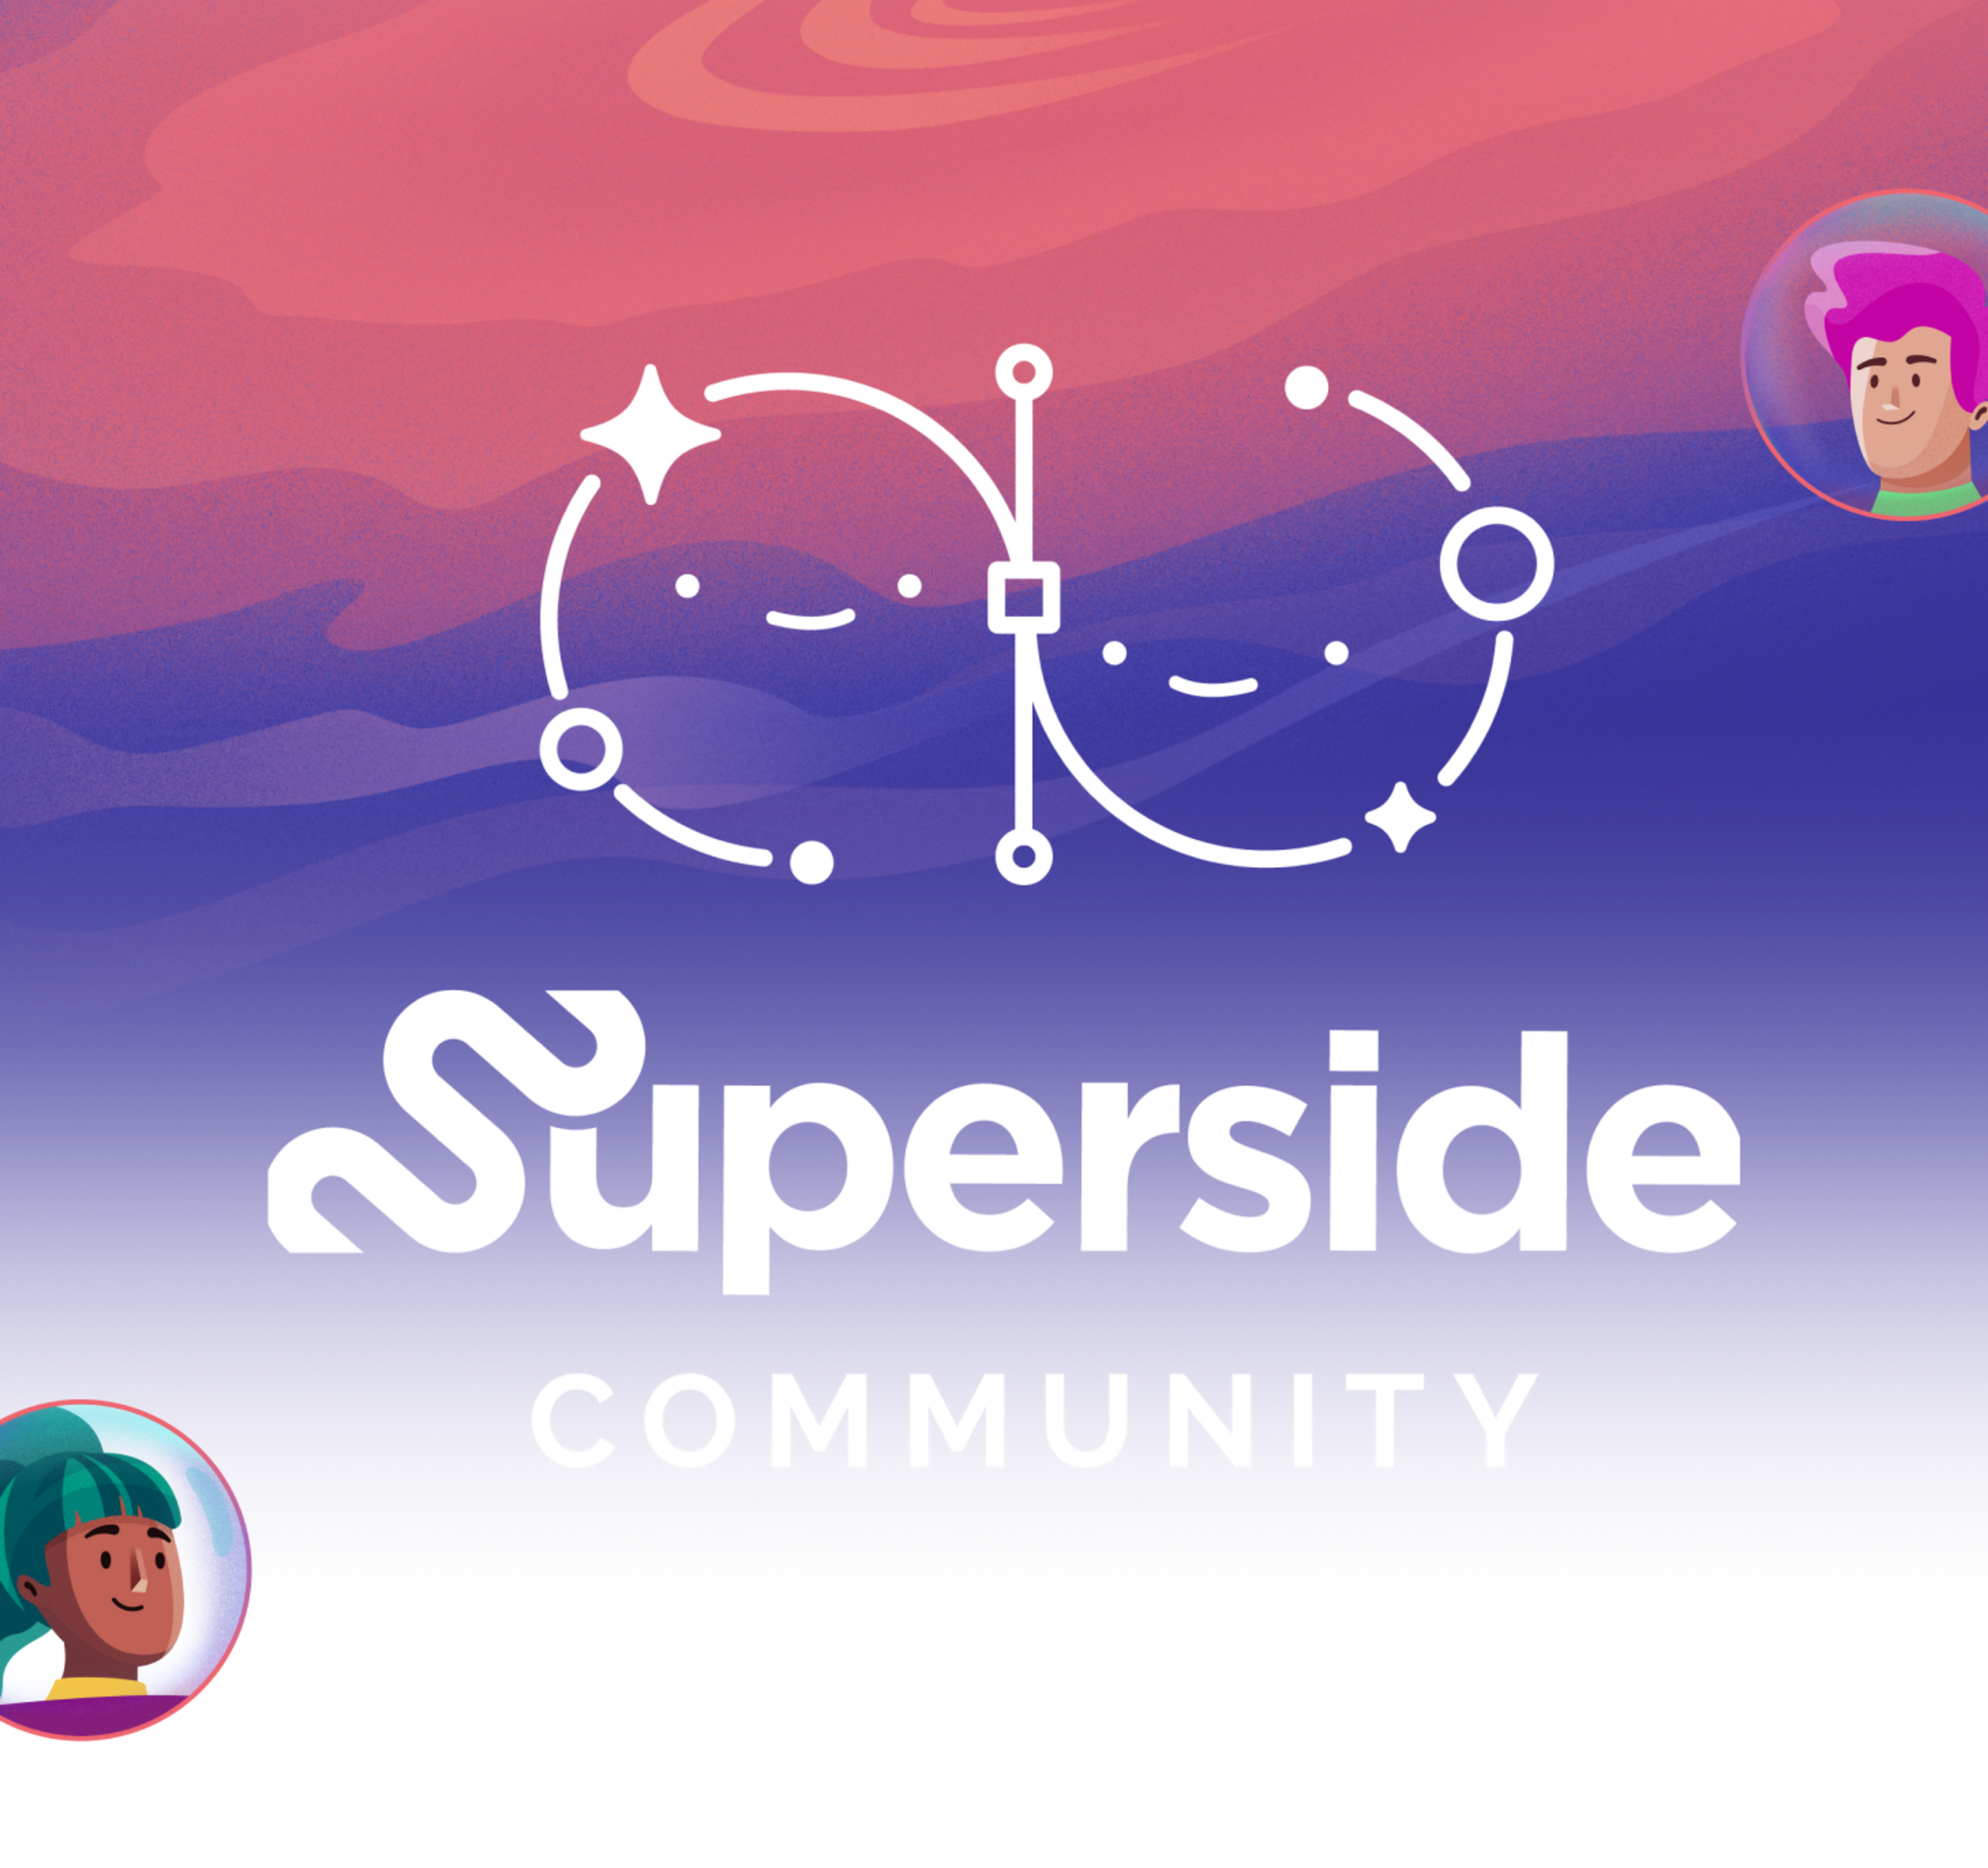 Join the Superside Community!